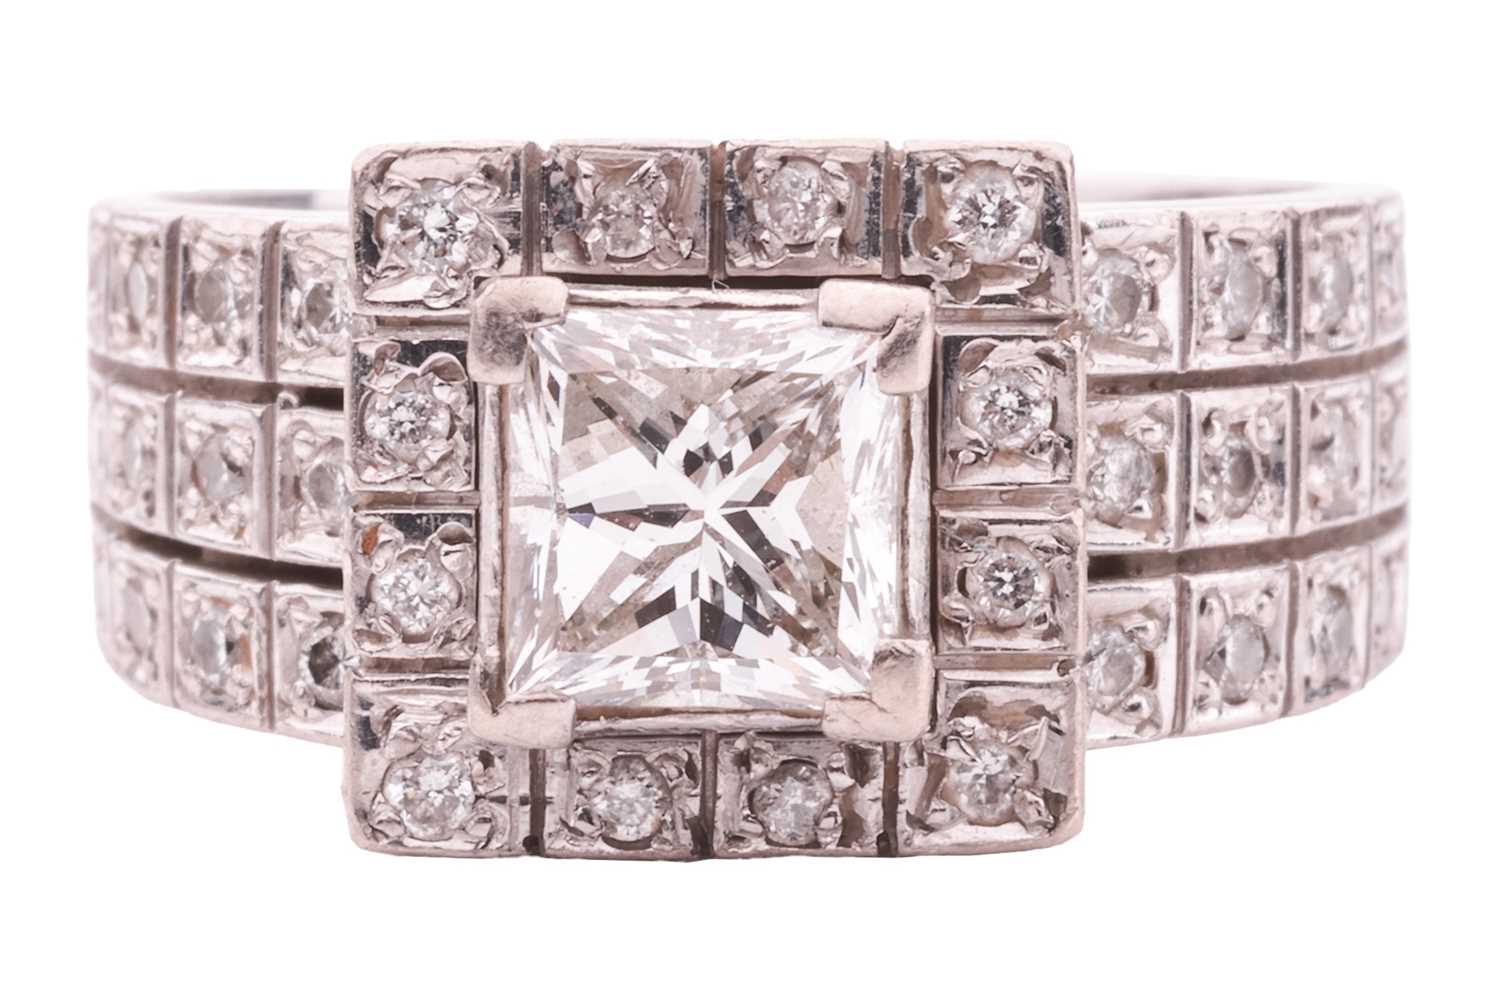 A princess-cut diamond cluster ring, featuring a princess-cut diamond with an estimated weight of 0.